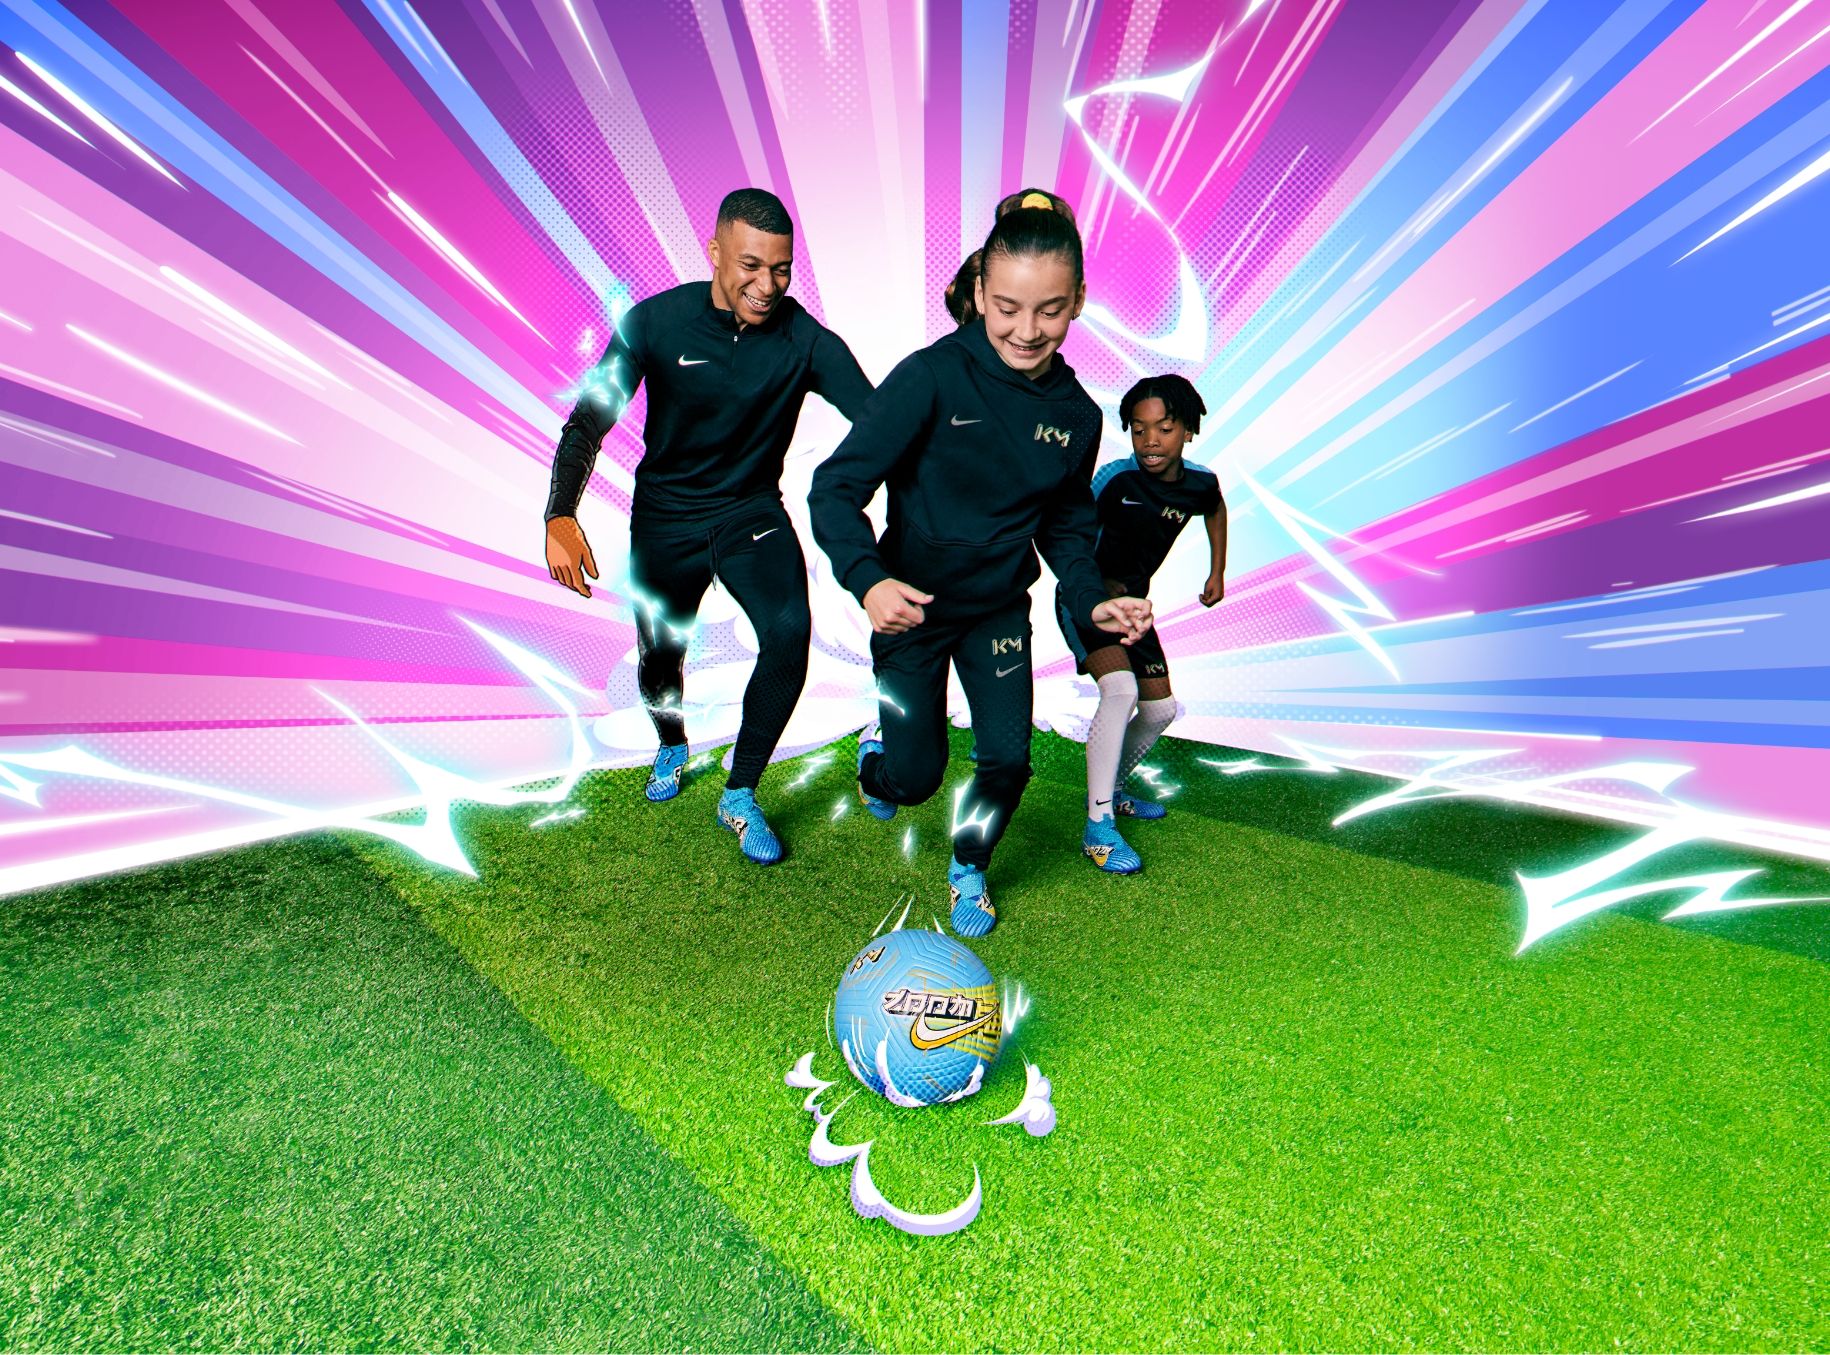 Mbappe playing soccer with two children. There is illustrated background showing speed lines and lightning.